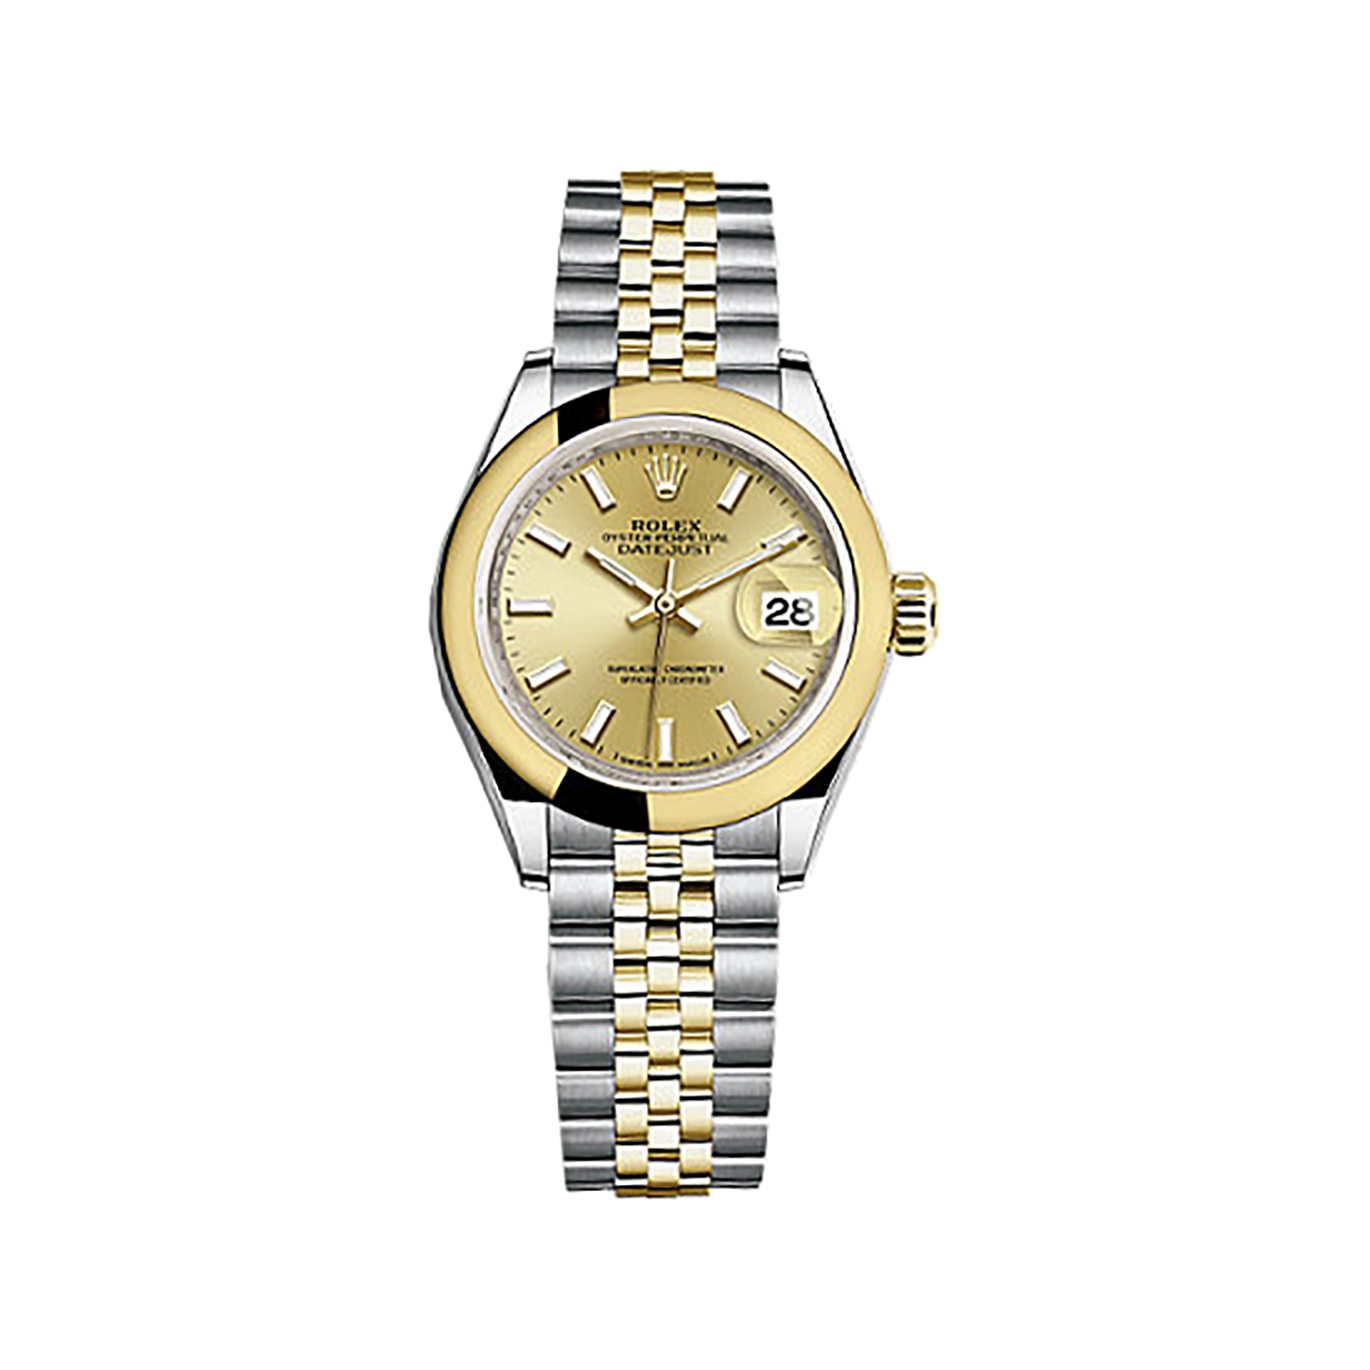 Lady-Datejust 28 279163 Gold & Stainless Steel Watch (Champagne)